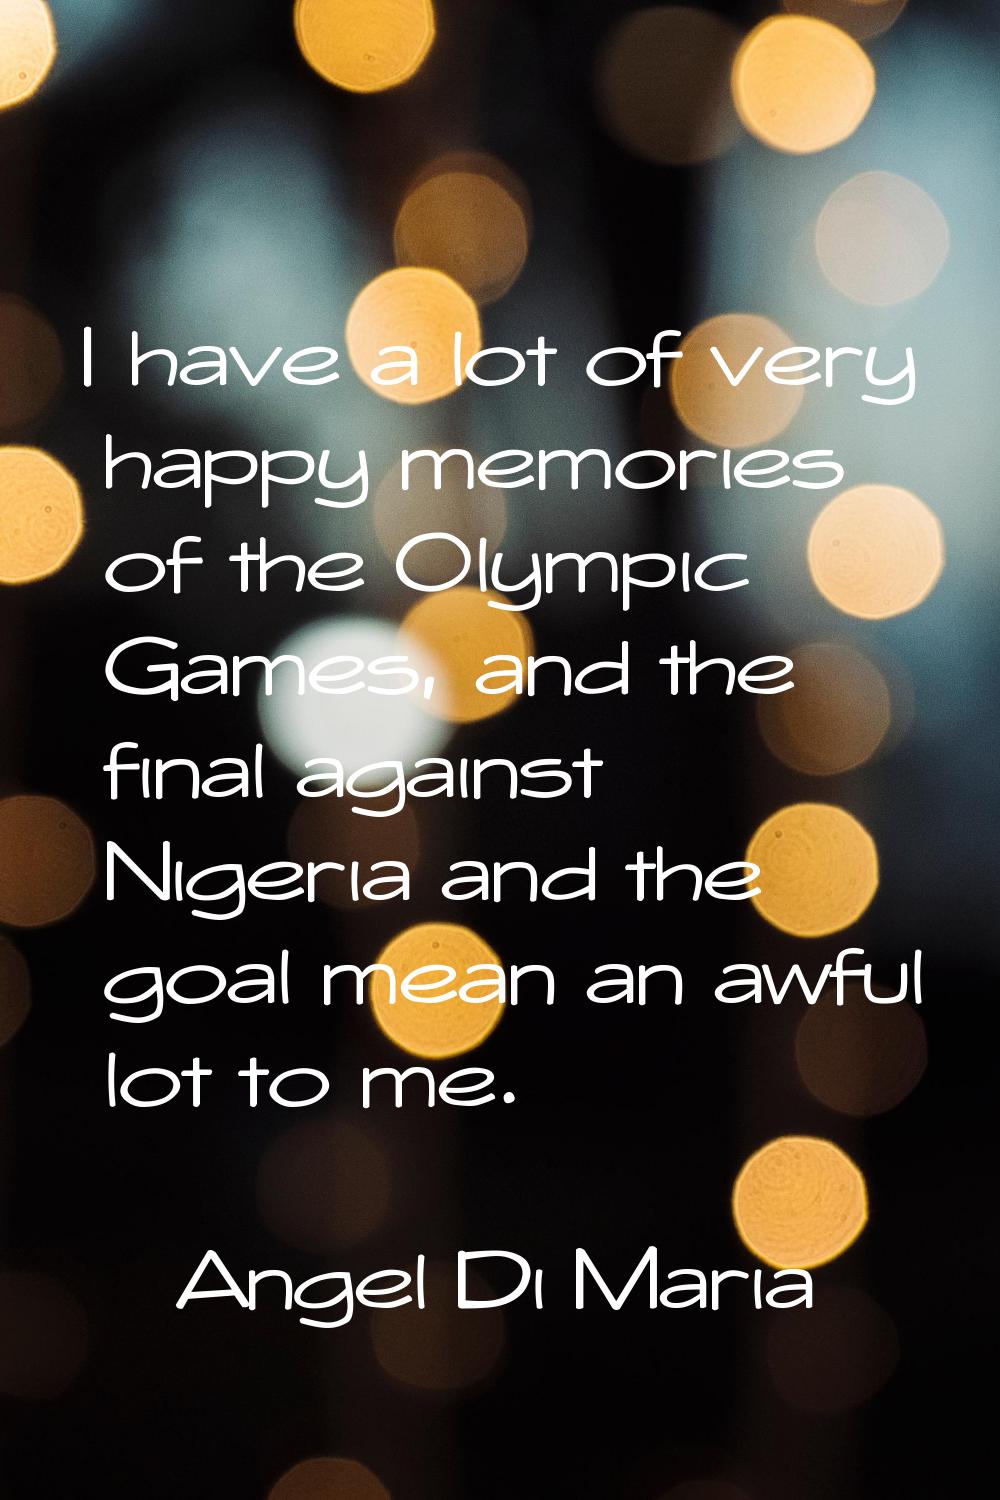 I have a lot of very happy memories of the Olympic Games, and the final against Nigeria and the goa